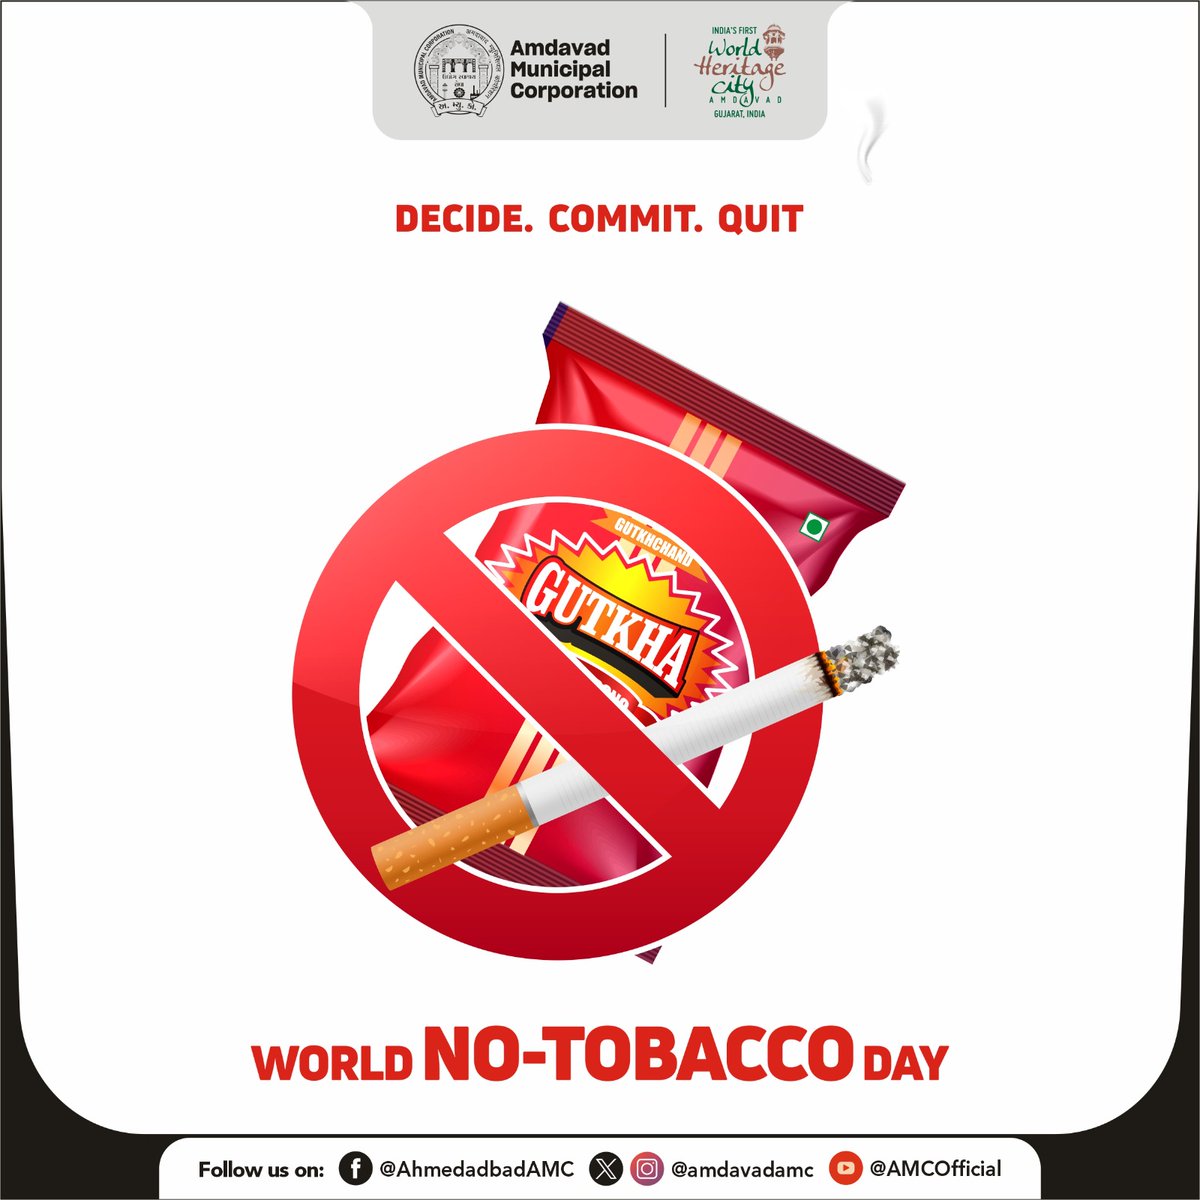 Take the first step towards a healthier, brighter future. Say no to cigarettes and gutkha. Say yes to life!

#AMC #amcforpeople #WolrdNoTobaccoDay #ahmedabad #municipalcorporation